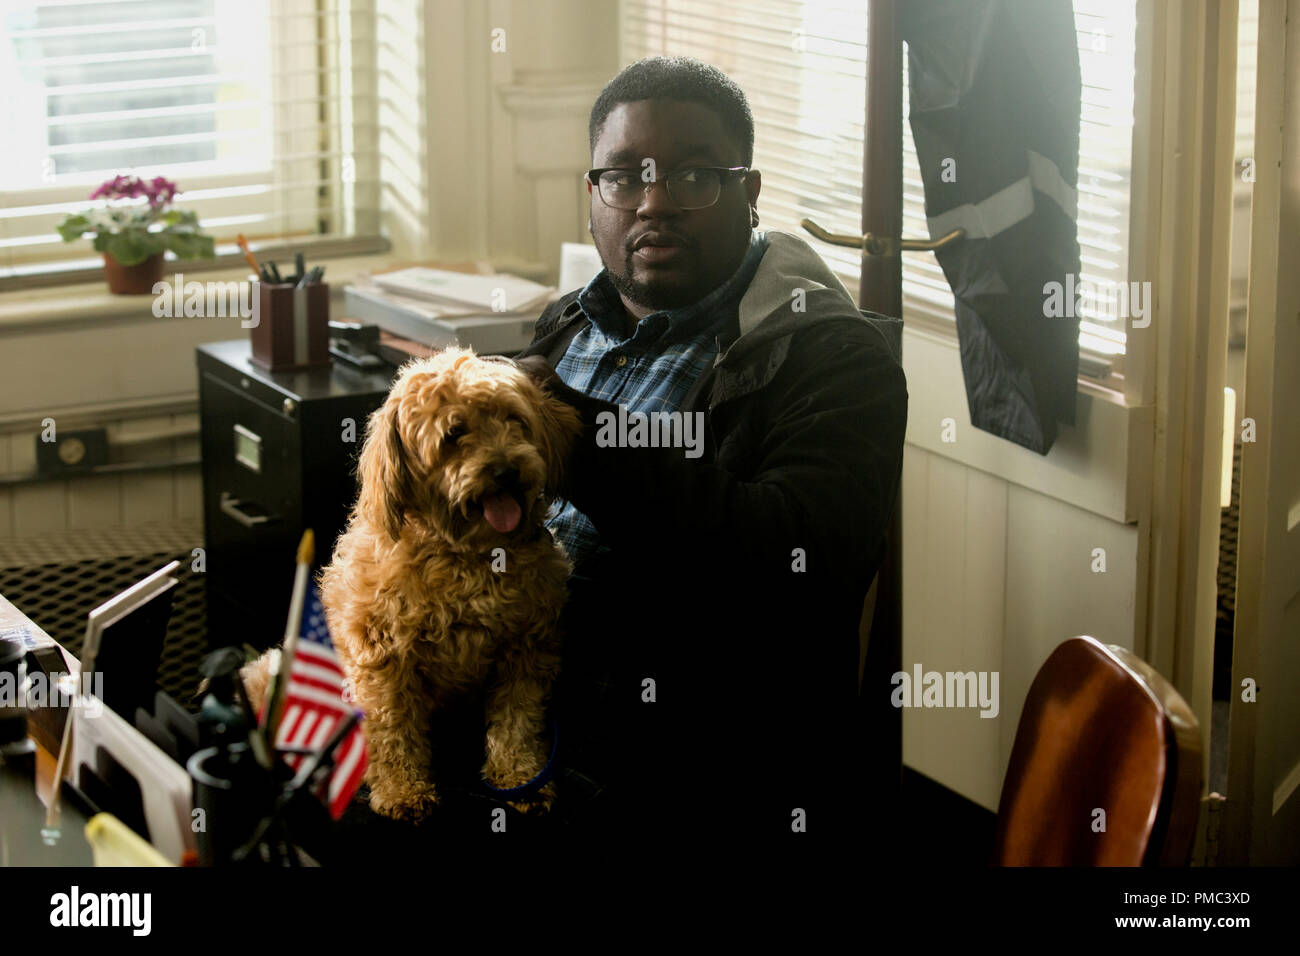 MILTON “LIL REL” HOWERY as Rod Williams in Universal Pictures' “Get Out,” a  speculative thriller from Blumhouse. When a young African-American man  visits his white girlfriend's family estate, he becomes ensnared in